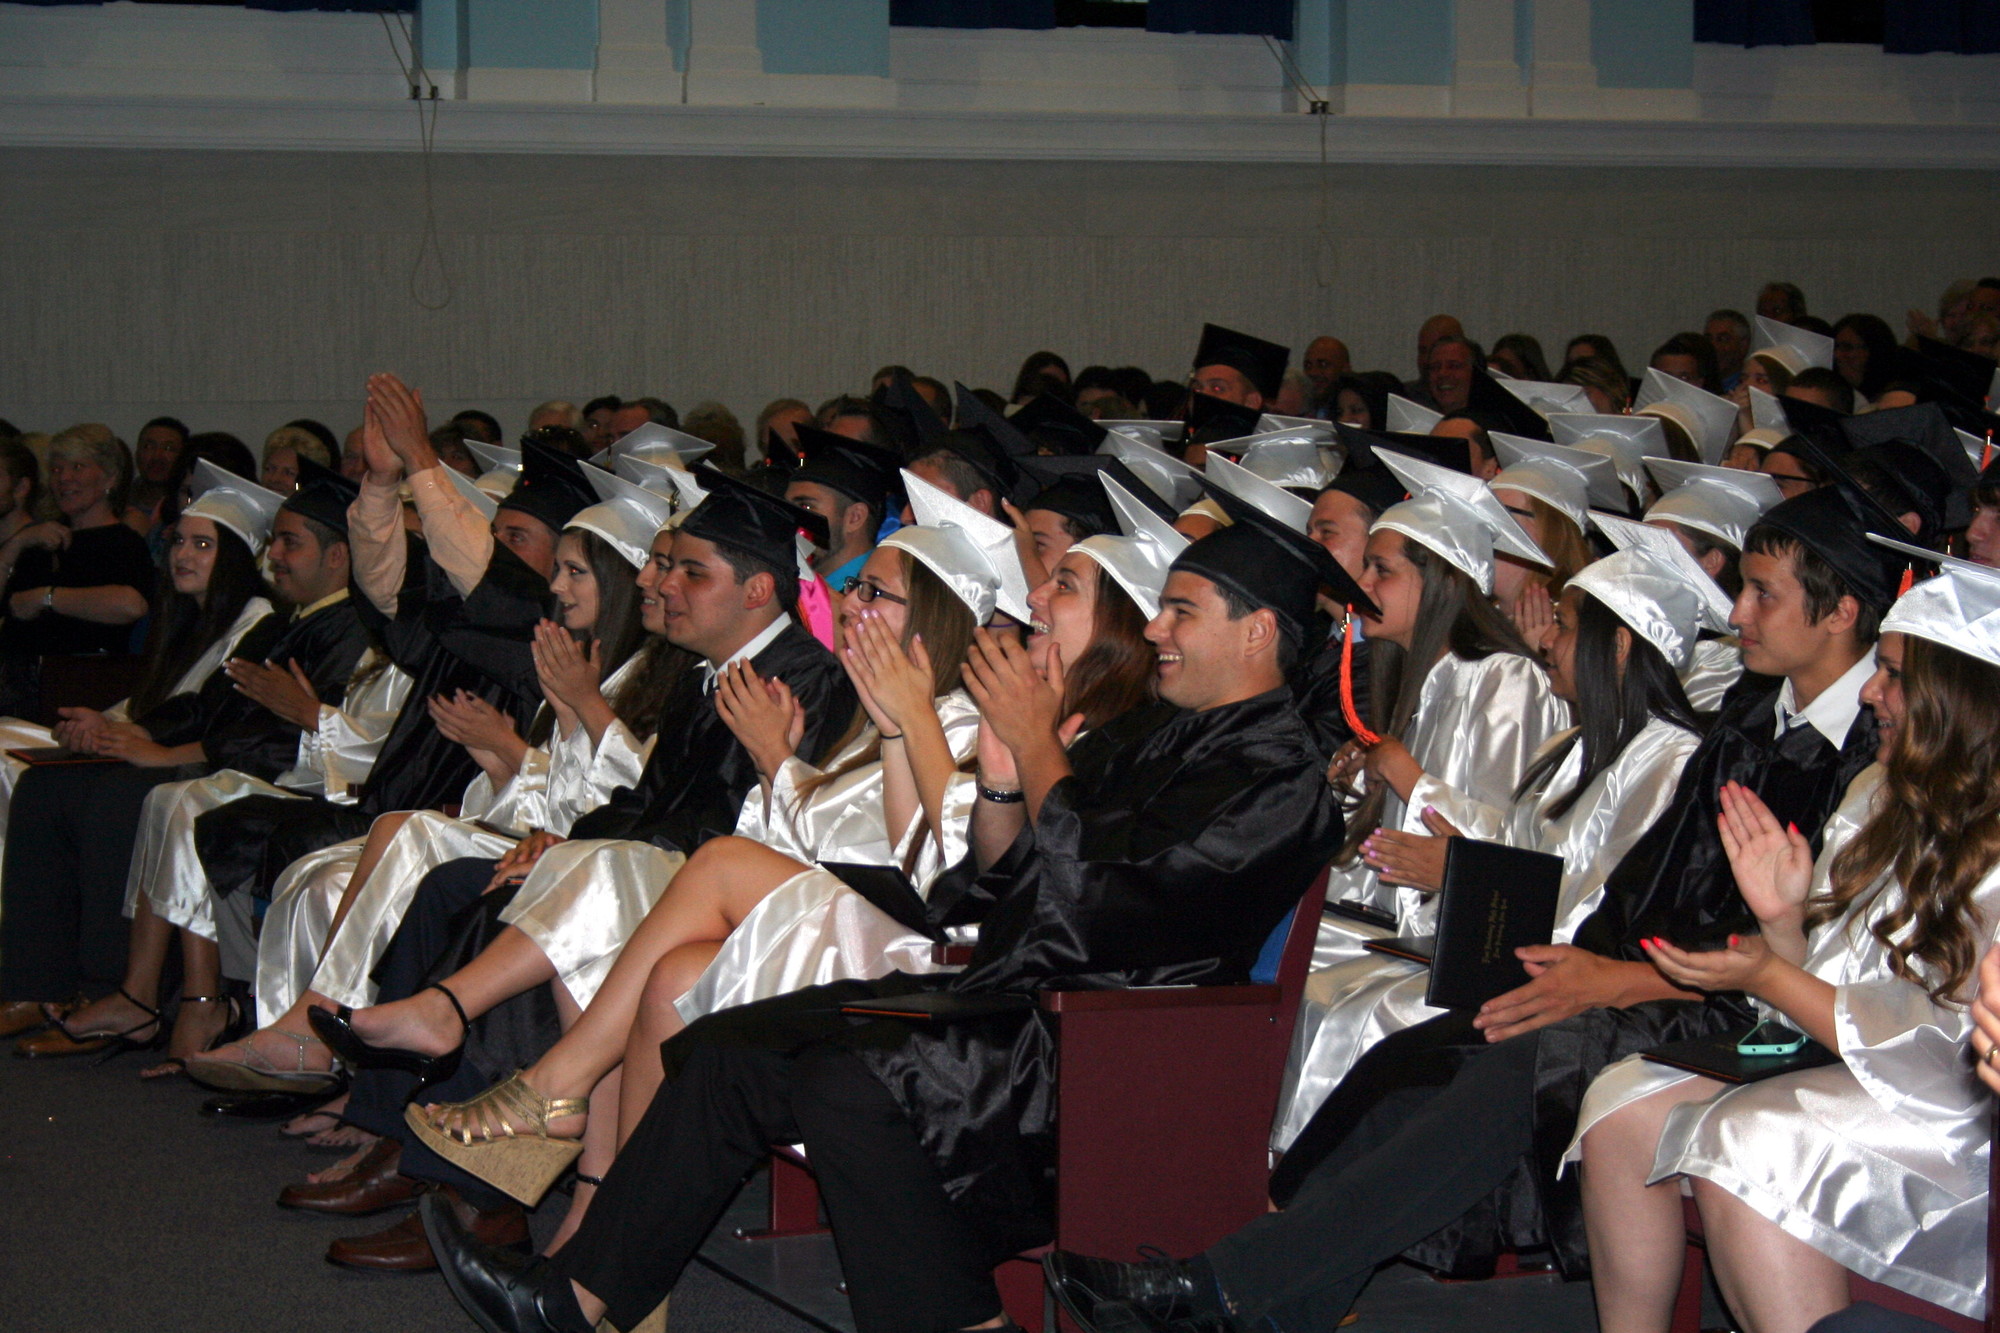 The soon-to-be graduates applauded the speakers at the ceremony.